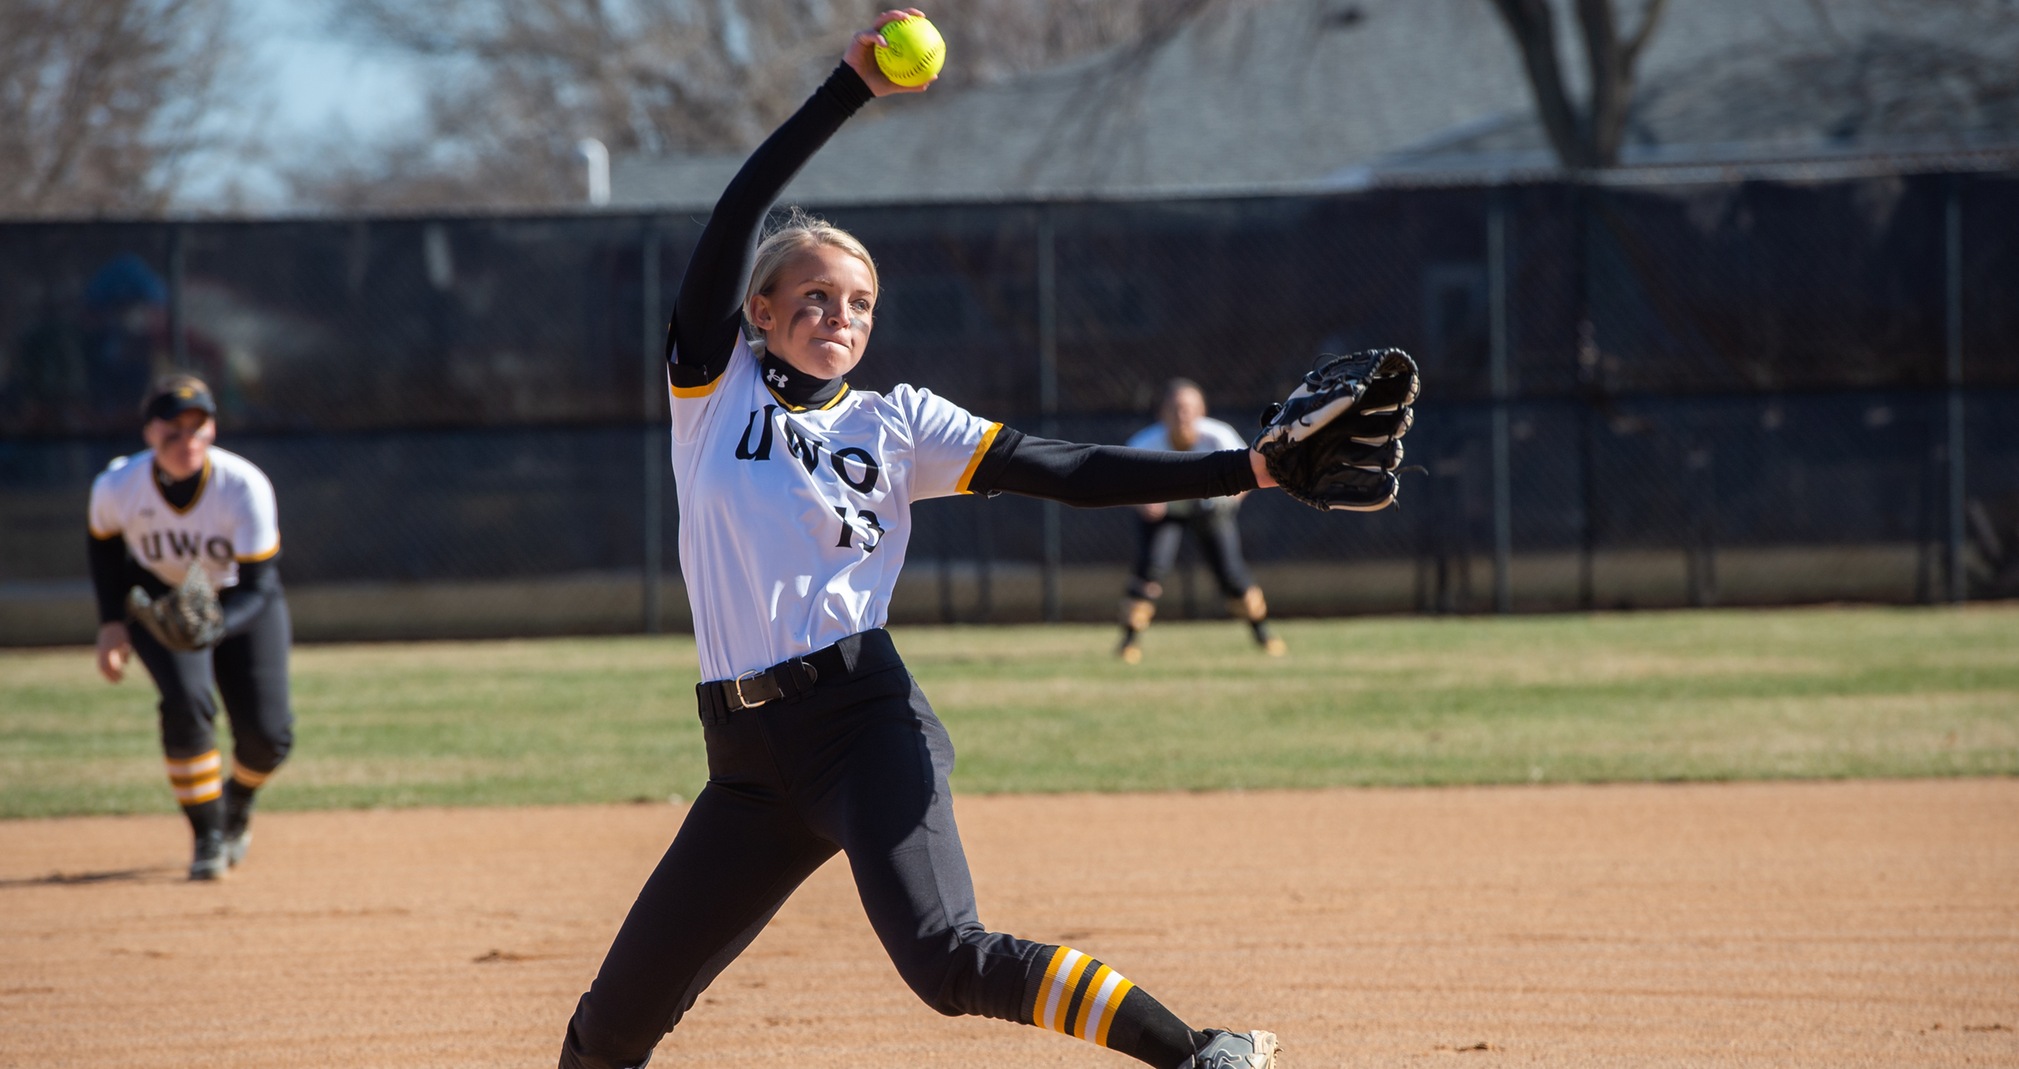 Bailey Smaney tied her career high with seven strikeouts against the Falcons.